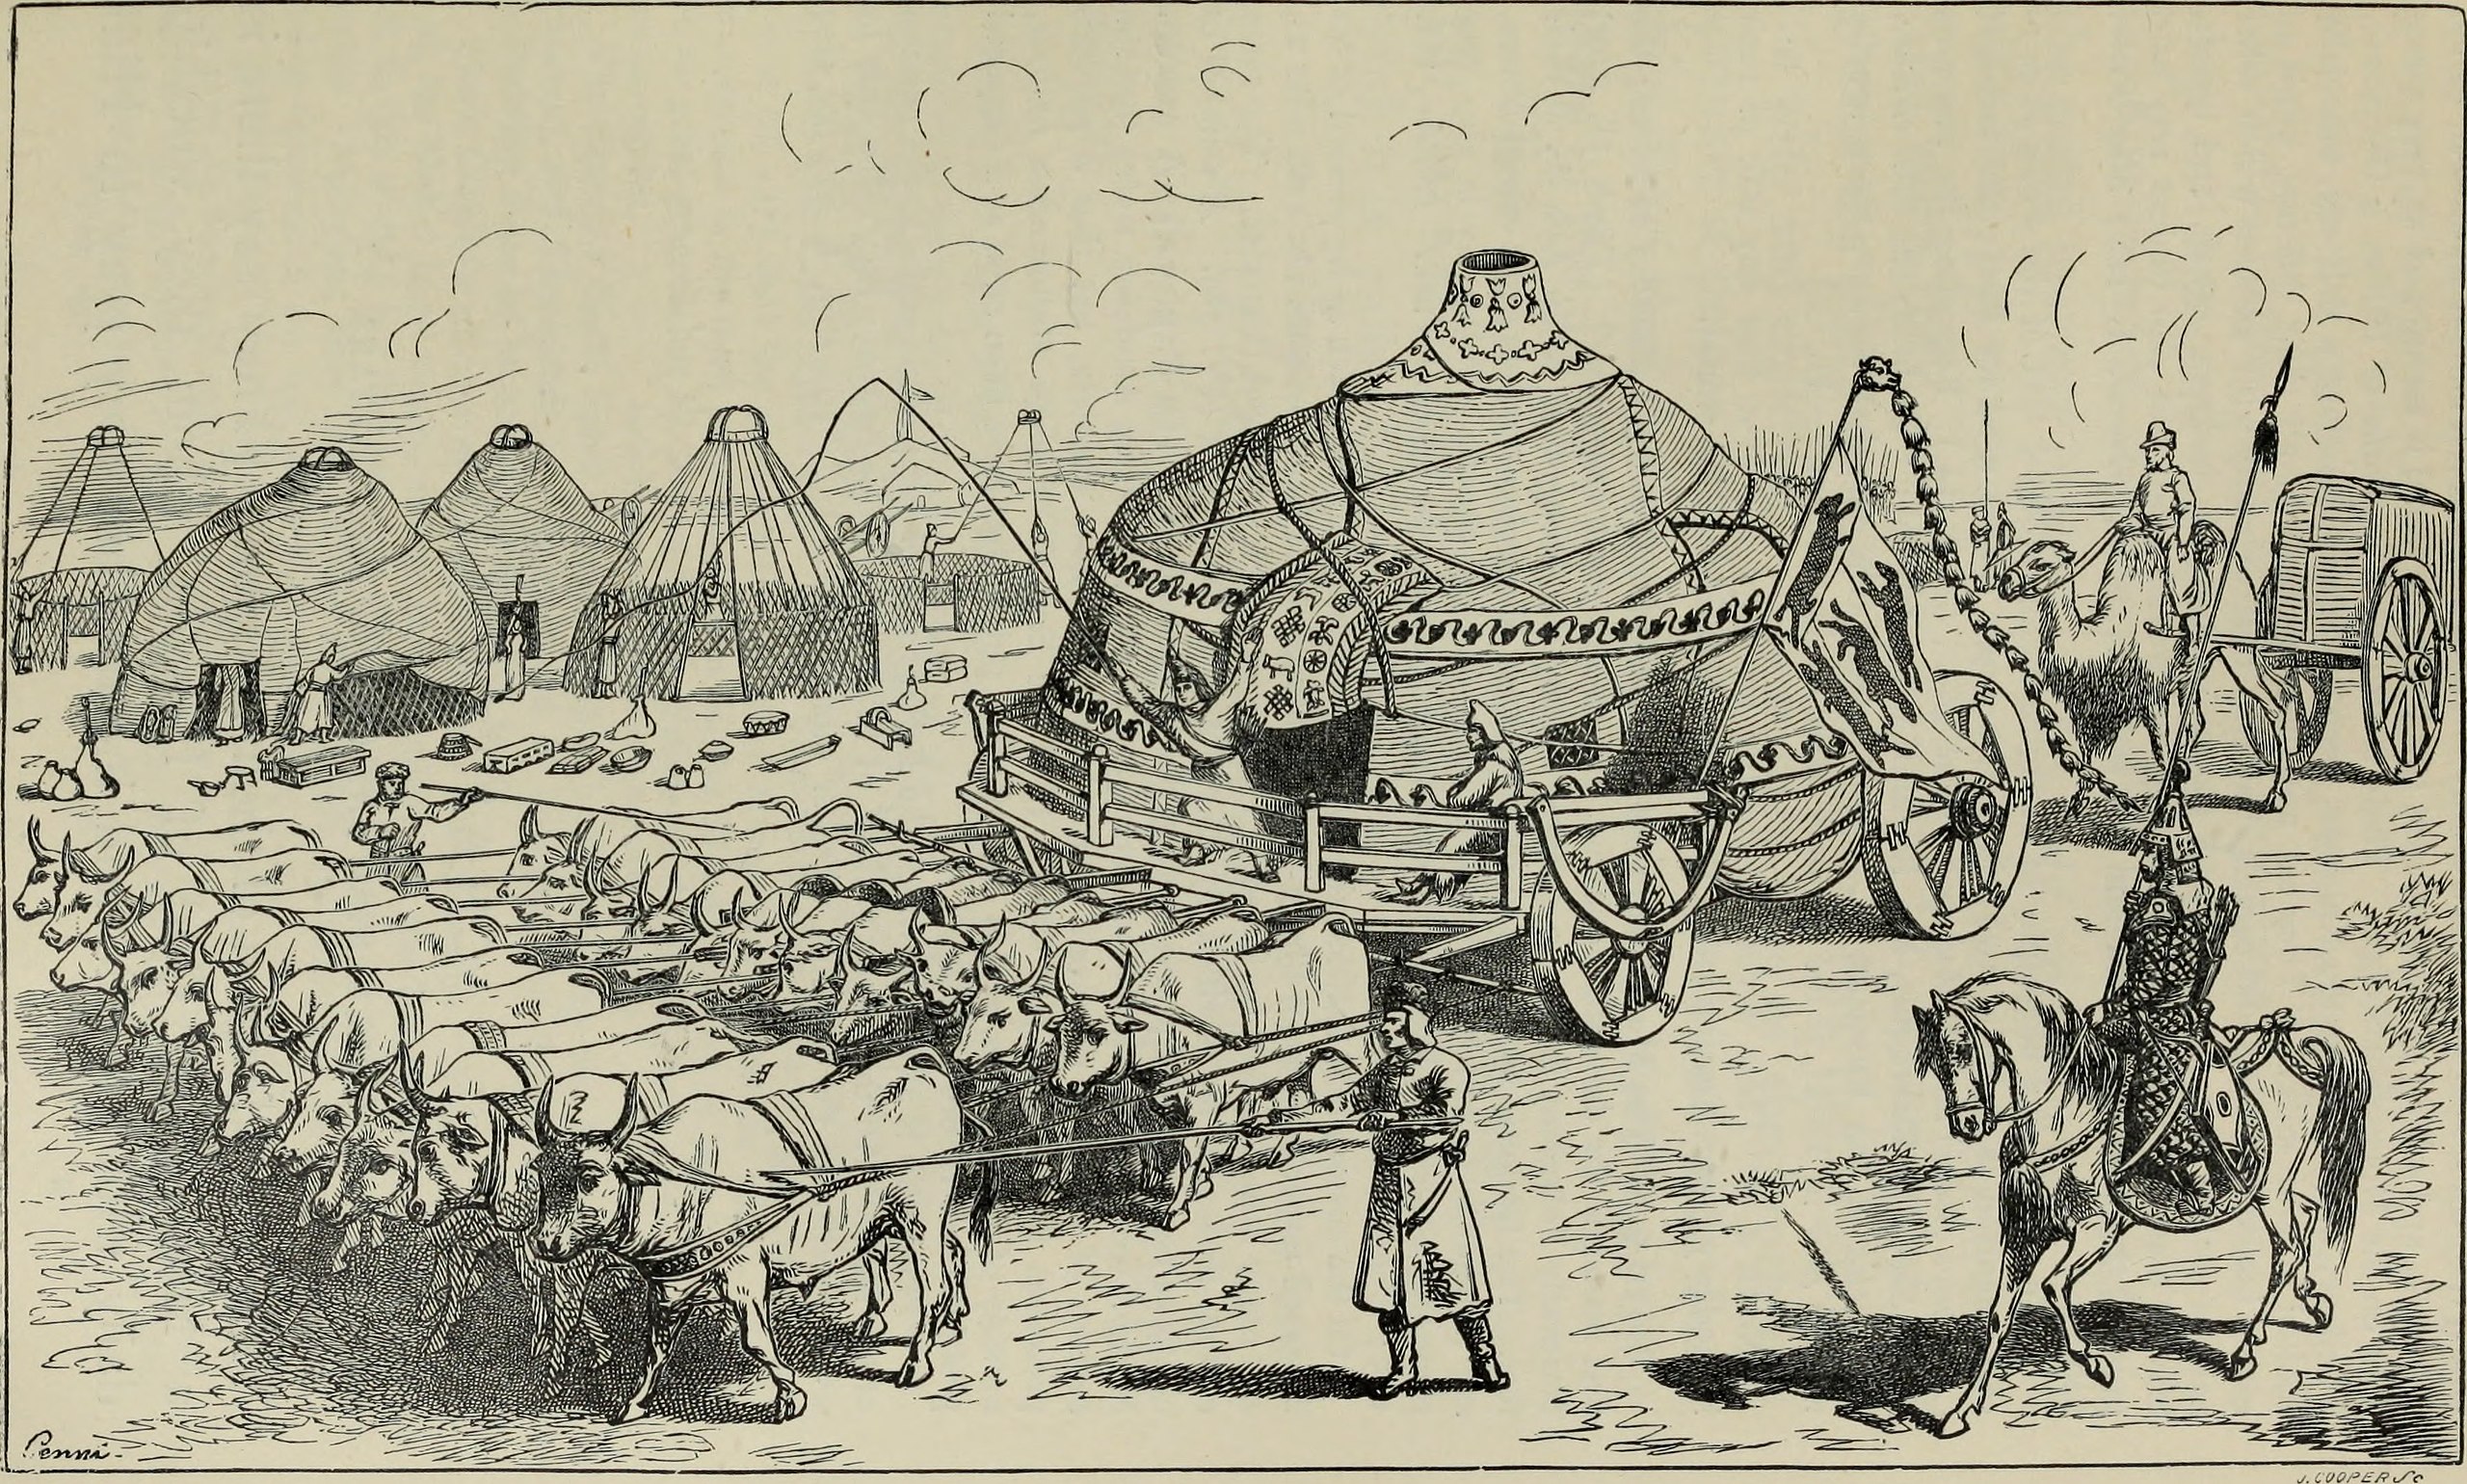 The Mongolian Steppe from the Book of Ser Marco Polo, an illustration